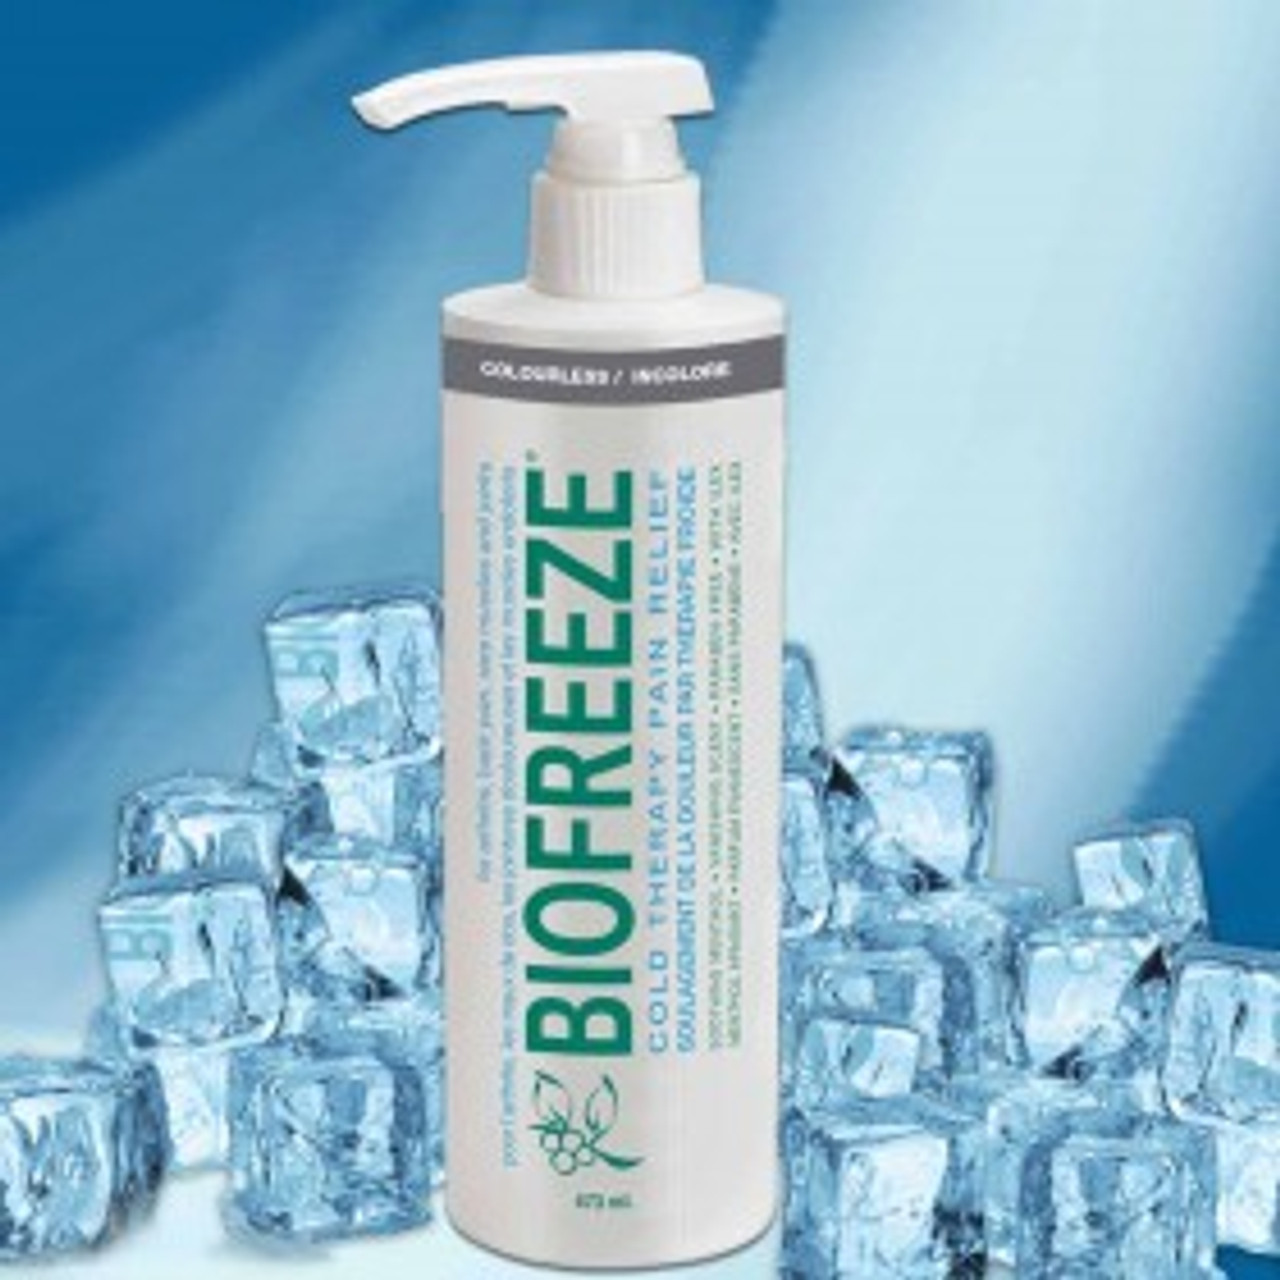 1/EA BIOFREEZE CRYOTHERAPY PAIN RELIEVING GEL PUMP BOTTLE 32OZ DYE AND PARABEN FREE